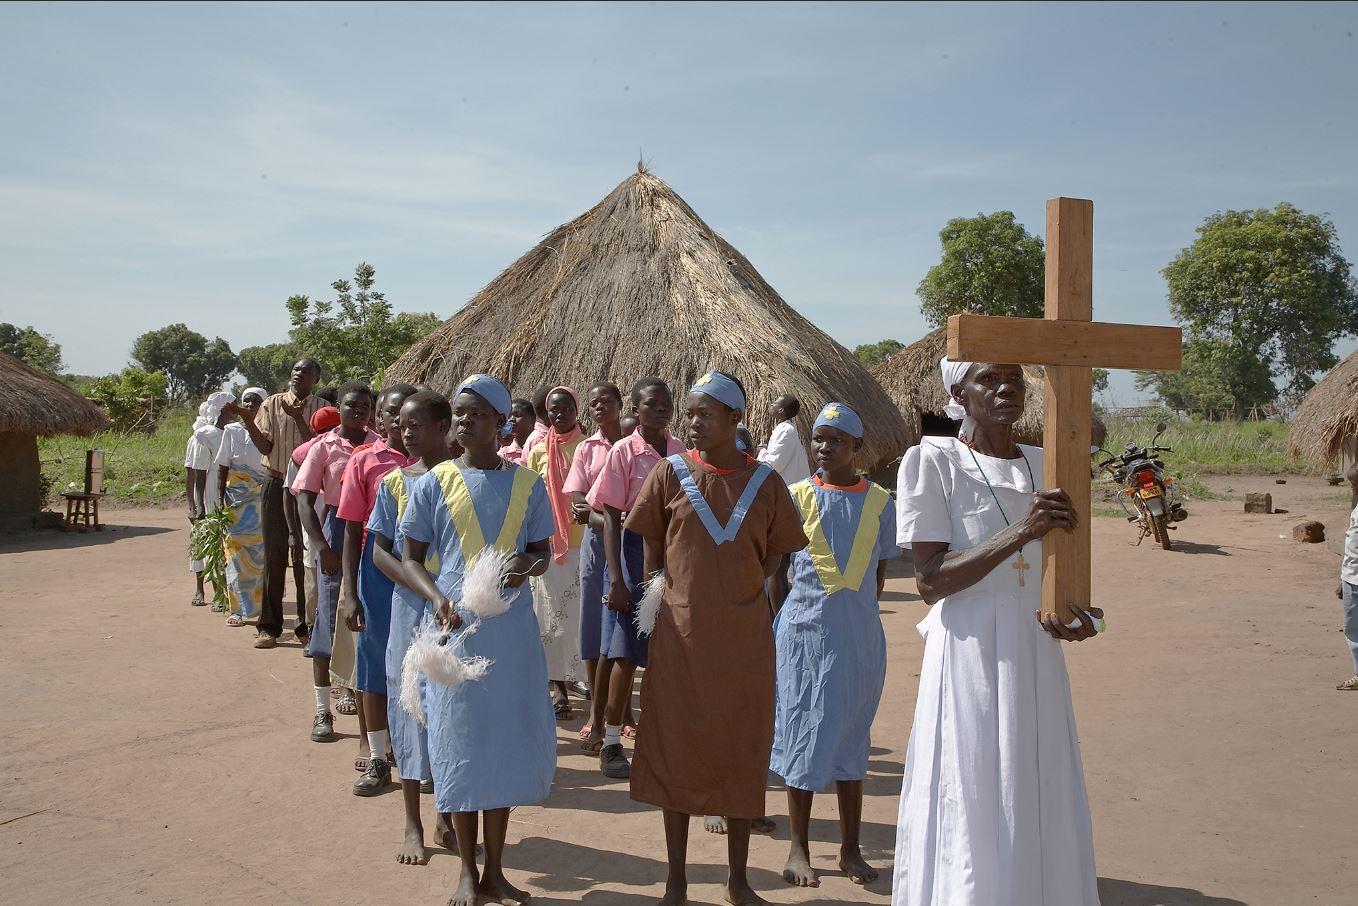 Members of the Catholic community in Yei, in southern South Sudan, celebrate the Feast of Saint Joseph. (Photo by Sean Sprague/Alamy Stock)